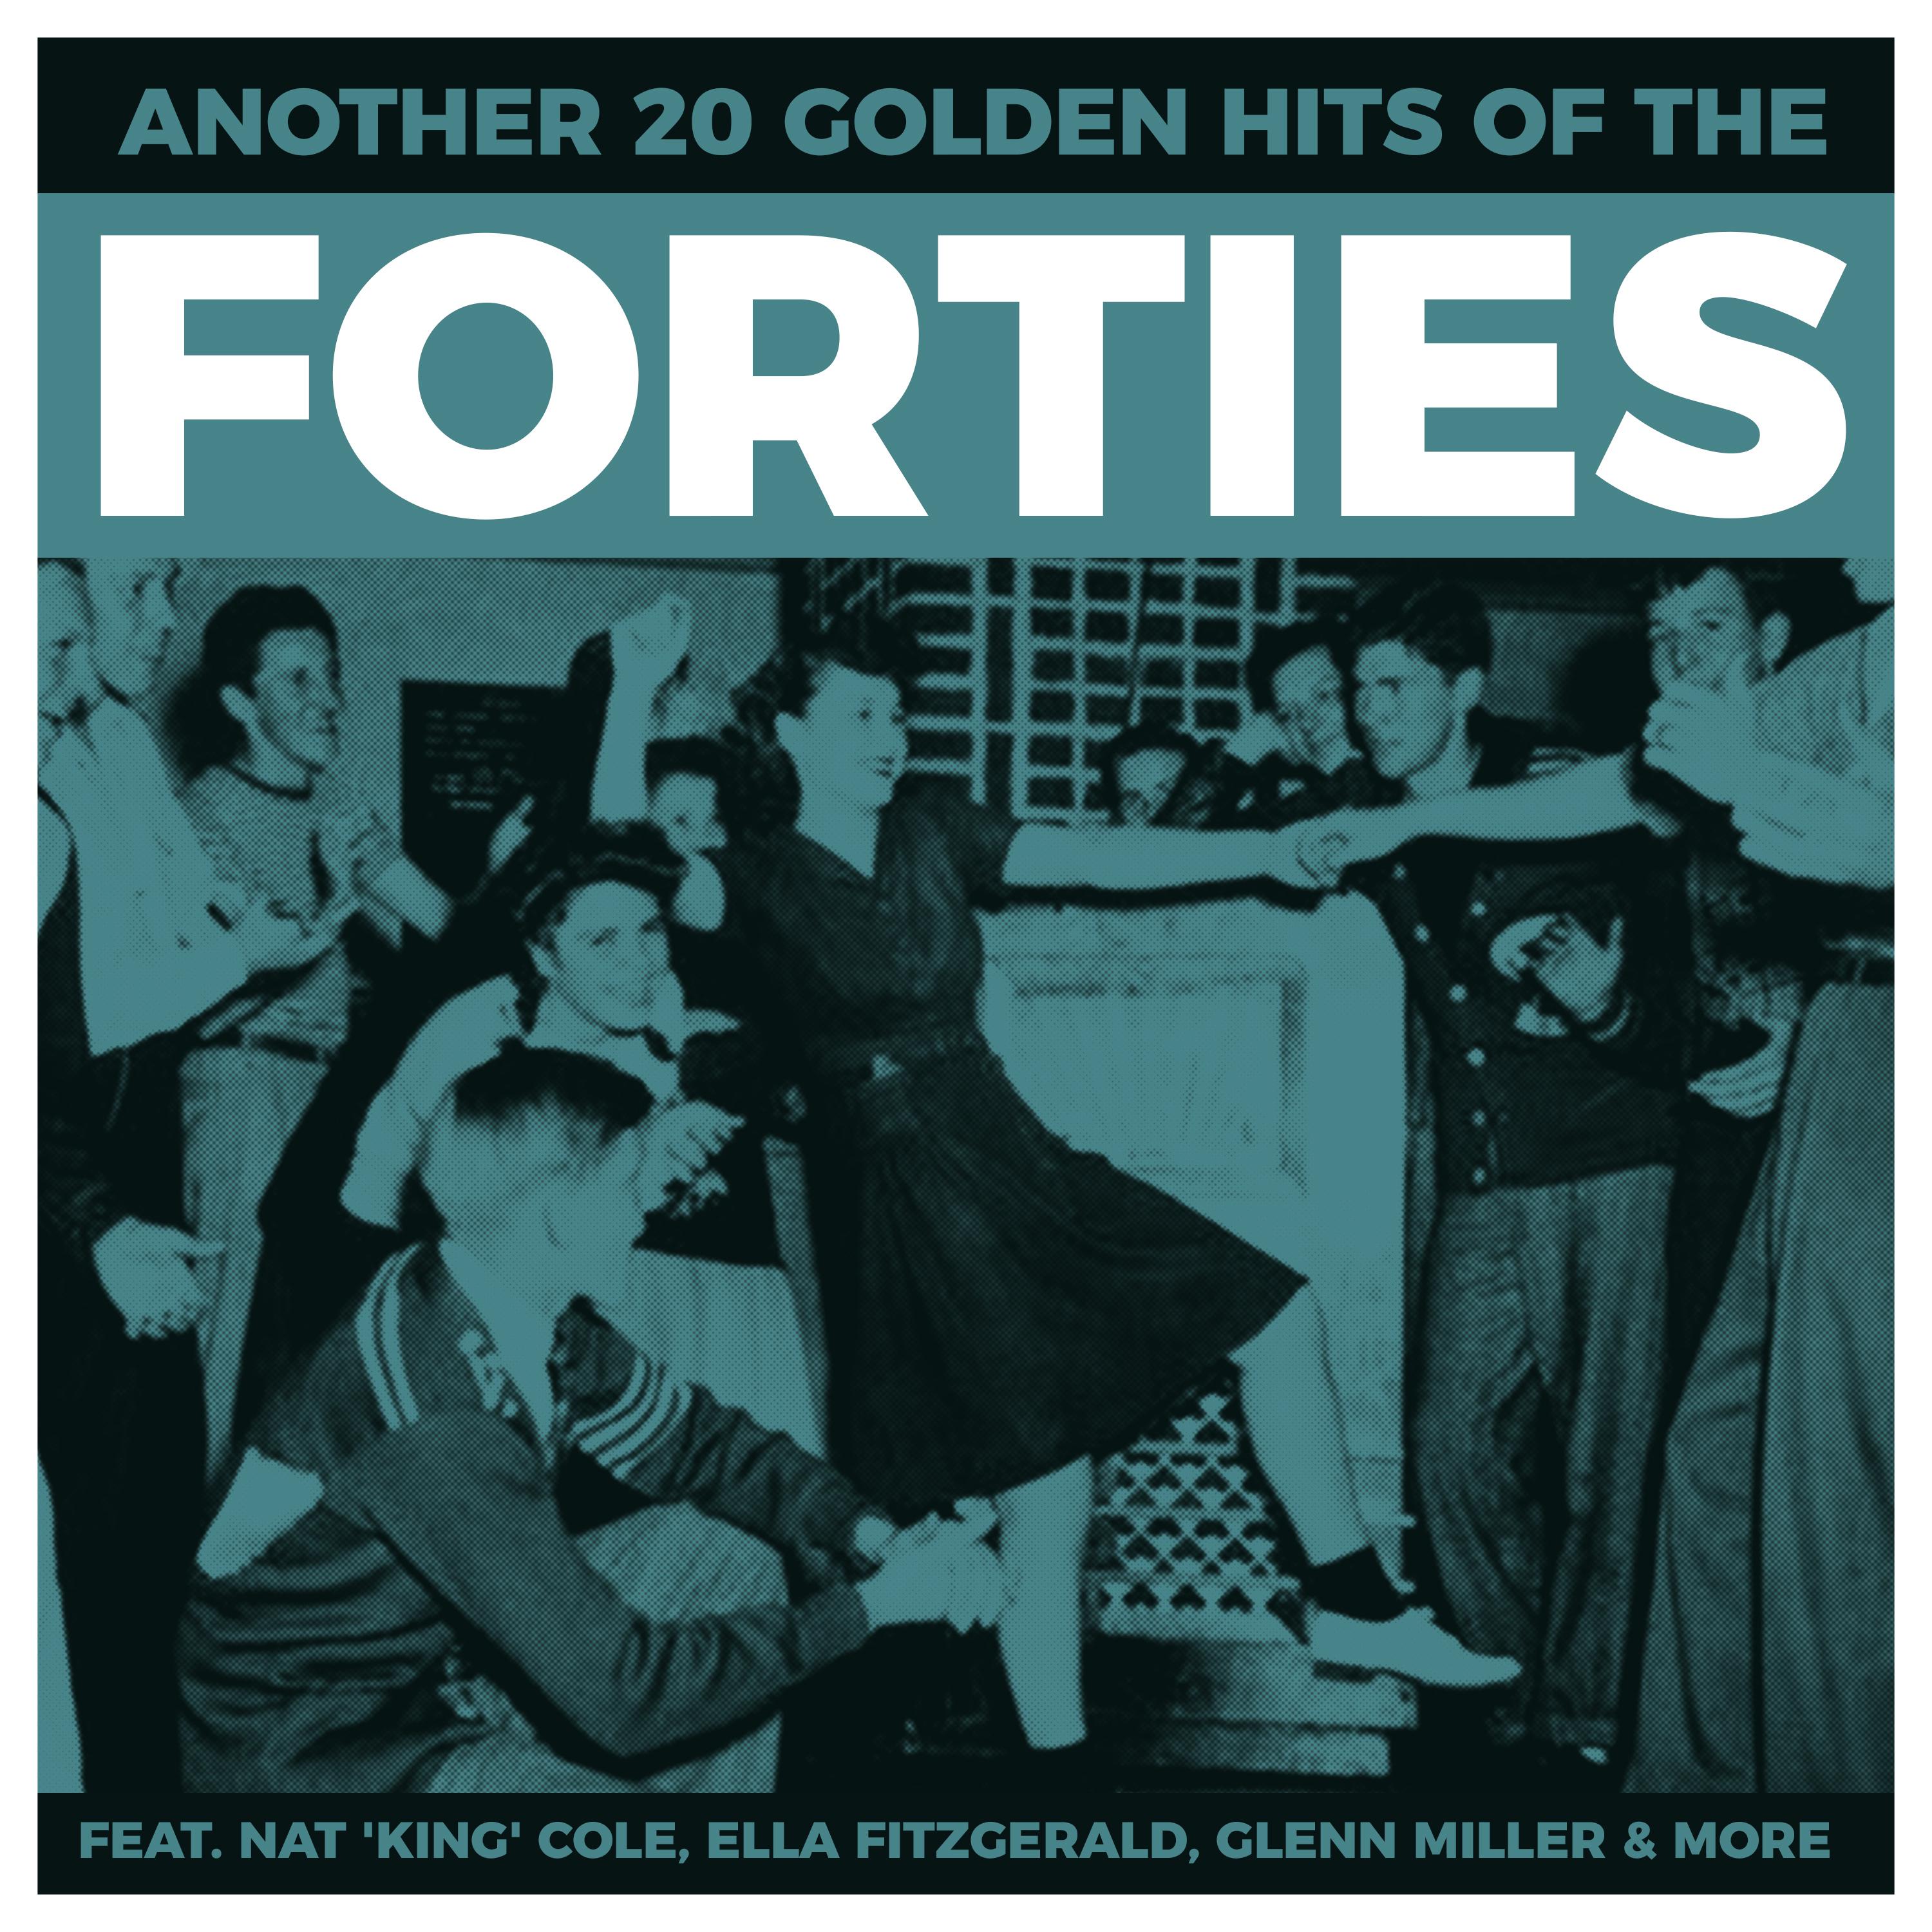 Another 20 Golden Hits Of The Forties